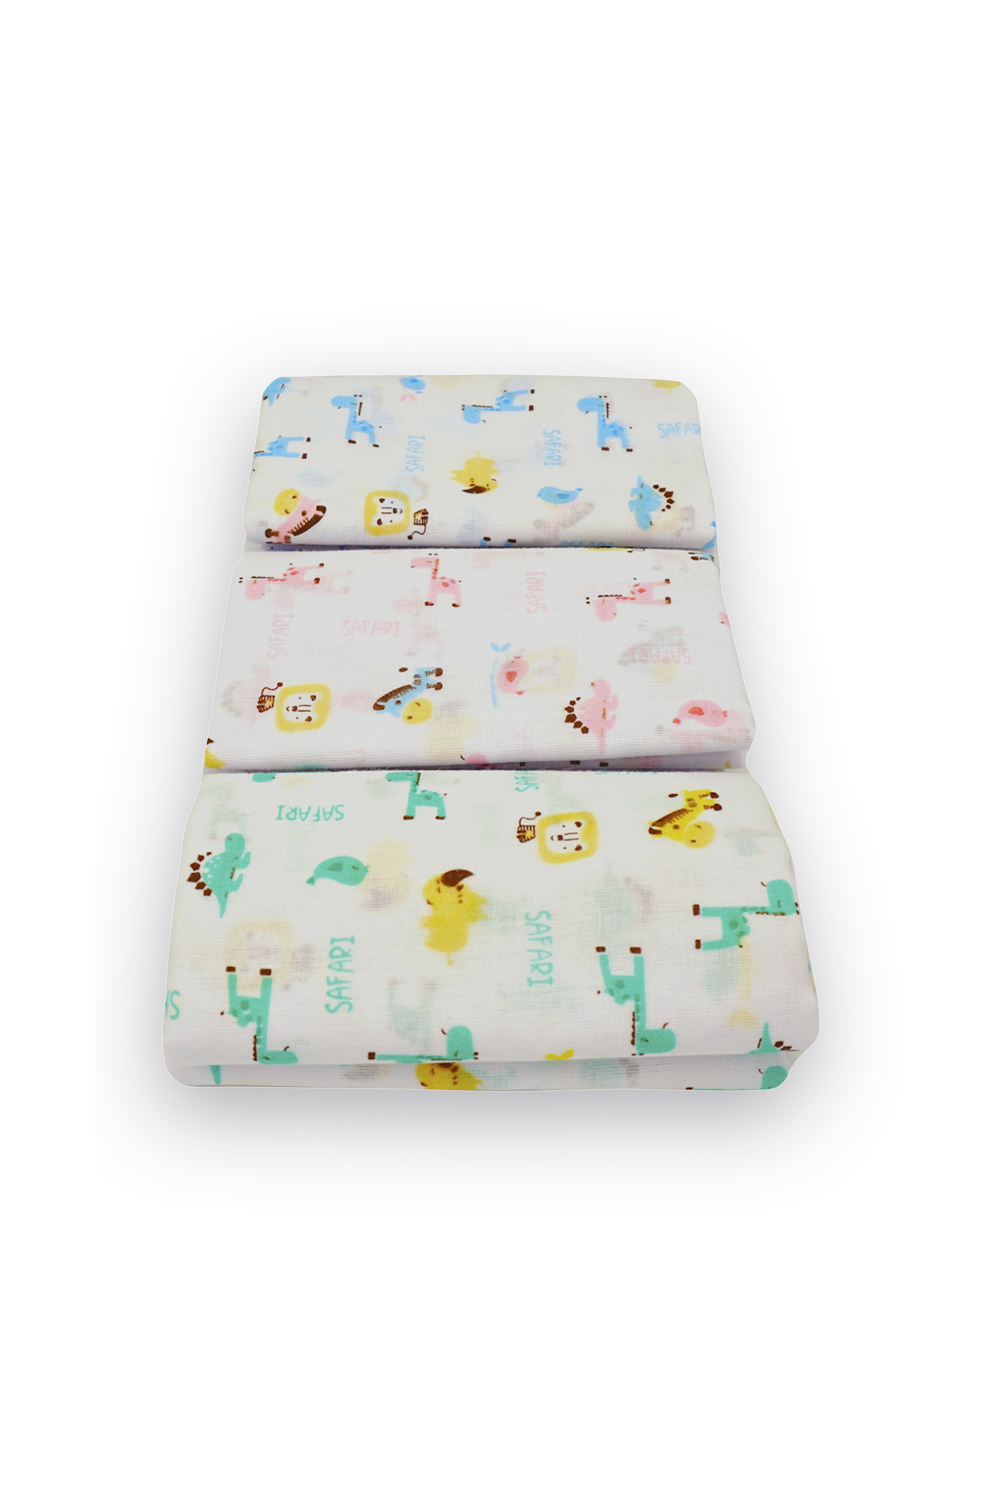 Diapers size(27 x 27")